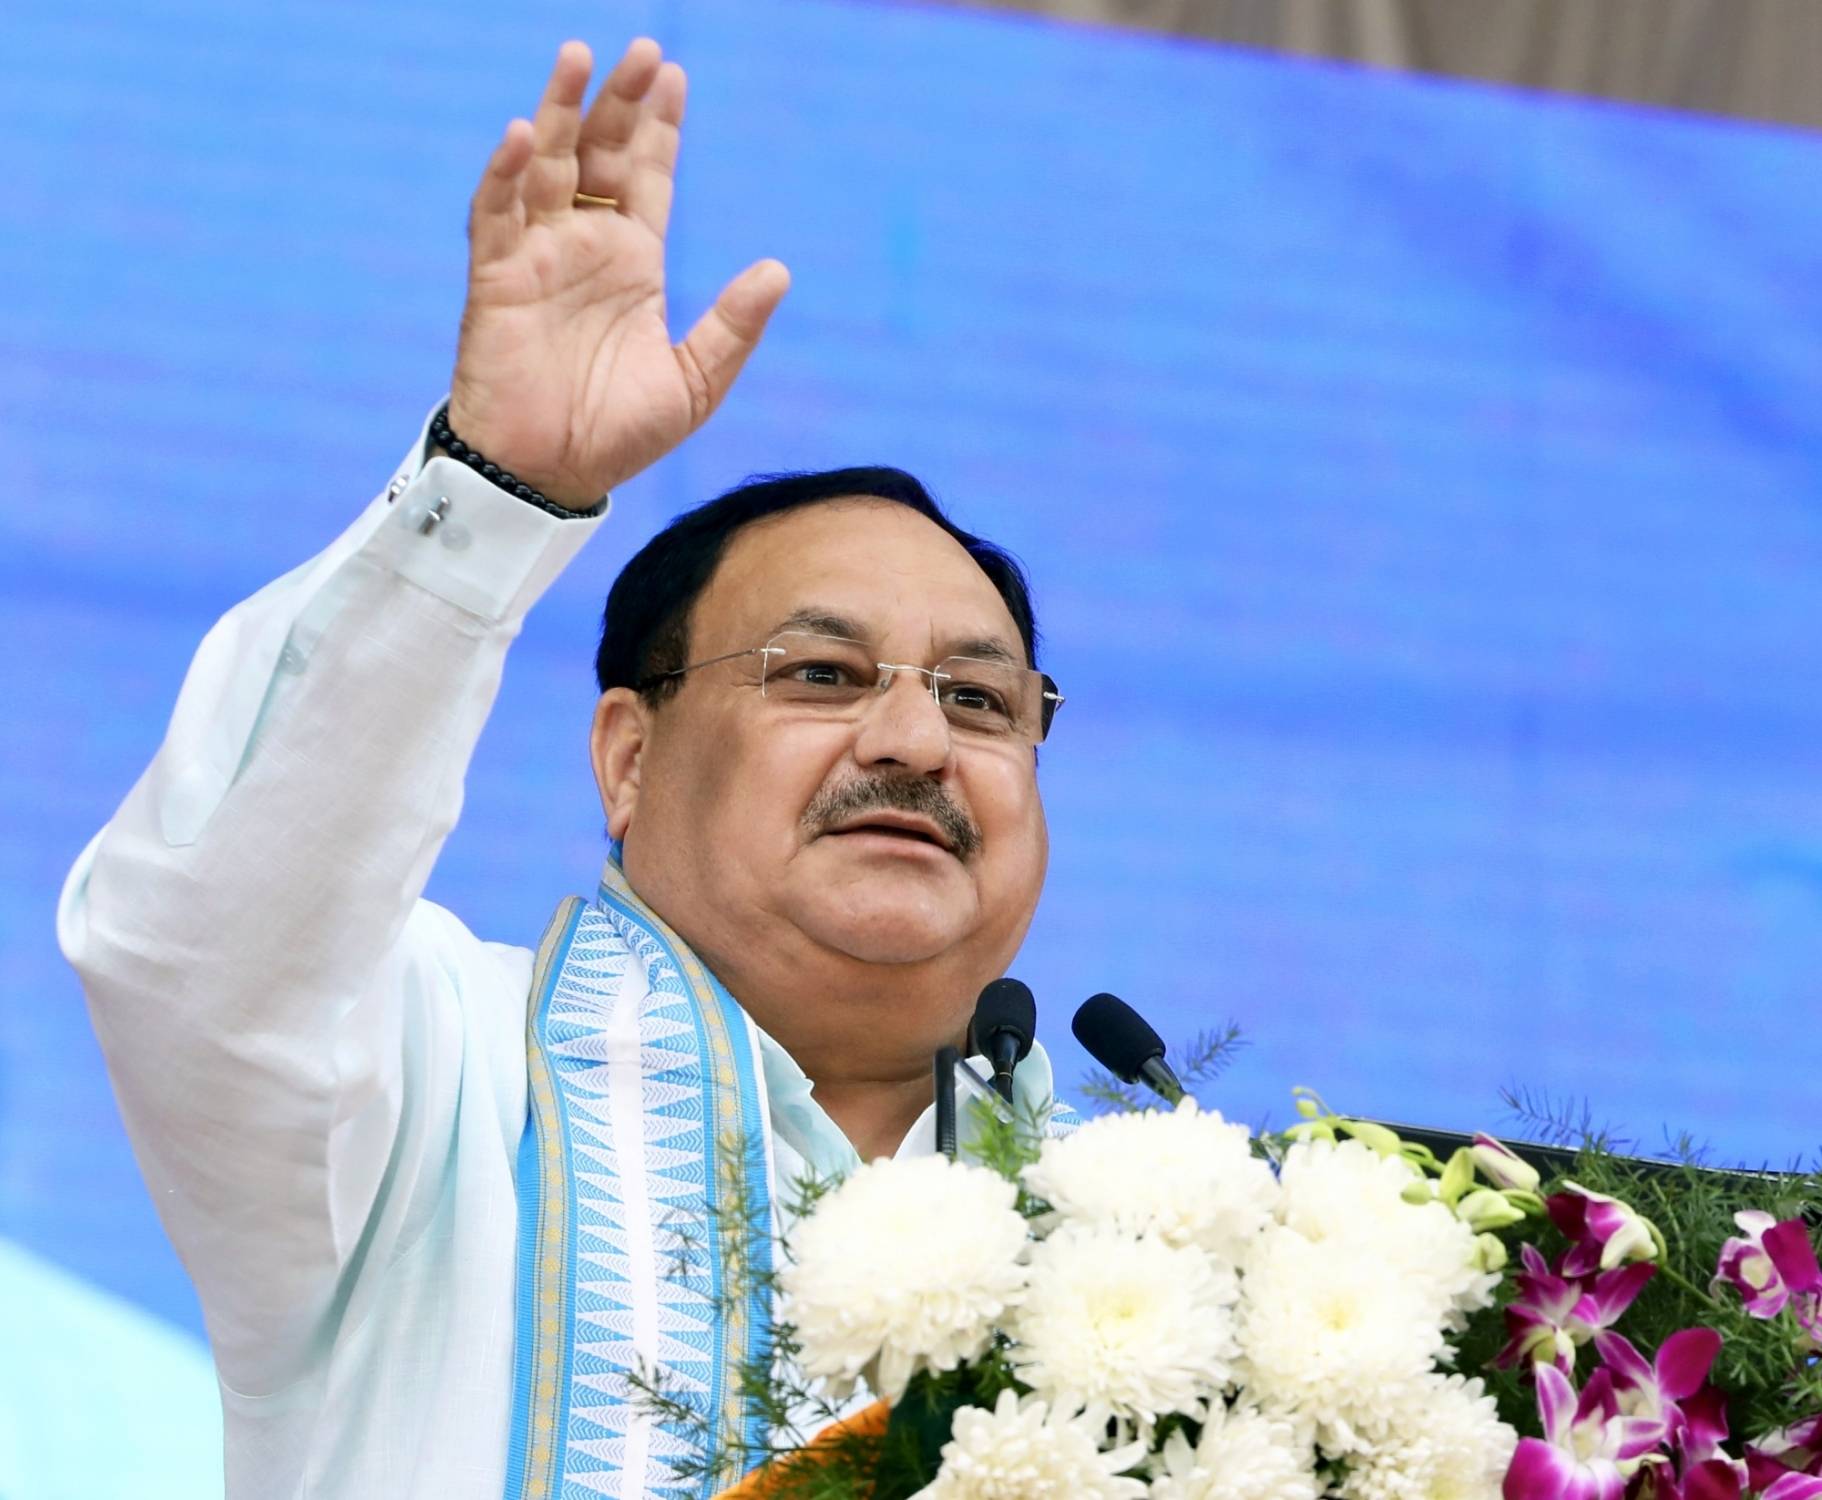 Koppal : BJP national president JP Nadda addresses during the inauguration ceremony of new party office in Koppal district on Thursday, Dec. 15, 2022. (Photo: Twitter/IANS)